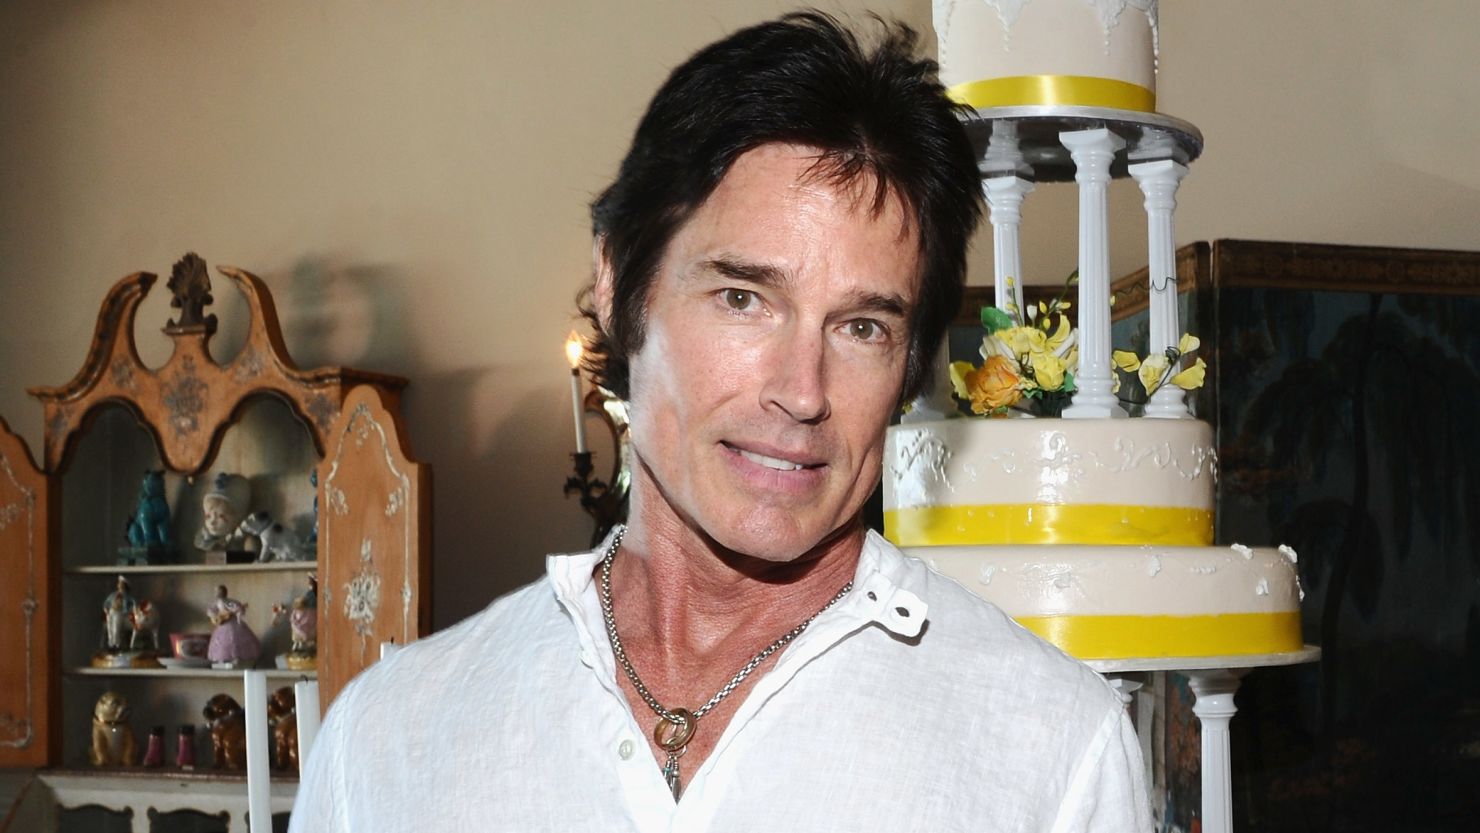 "I want to make sure that everybody knows how appreciative I am of what I've been doing the last 25 years," Ronn Moss said.